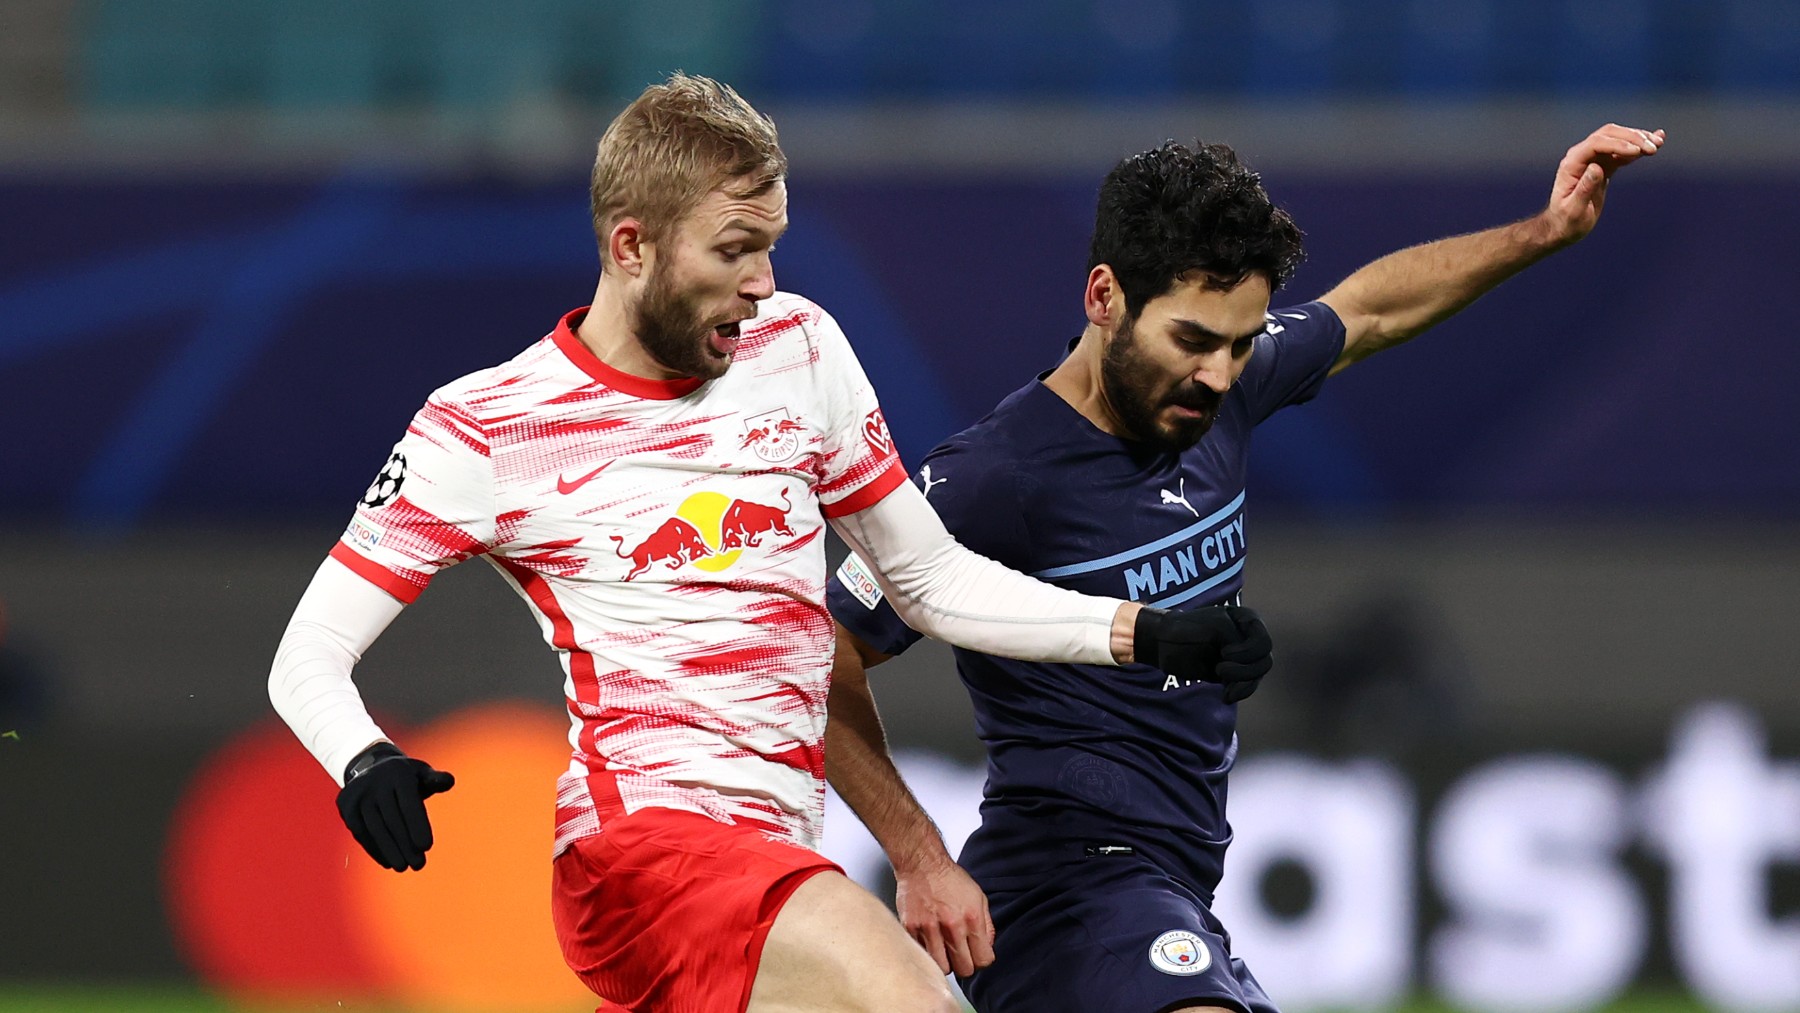 Duelo entre Leipzig y Manchester City. (Getty)